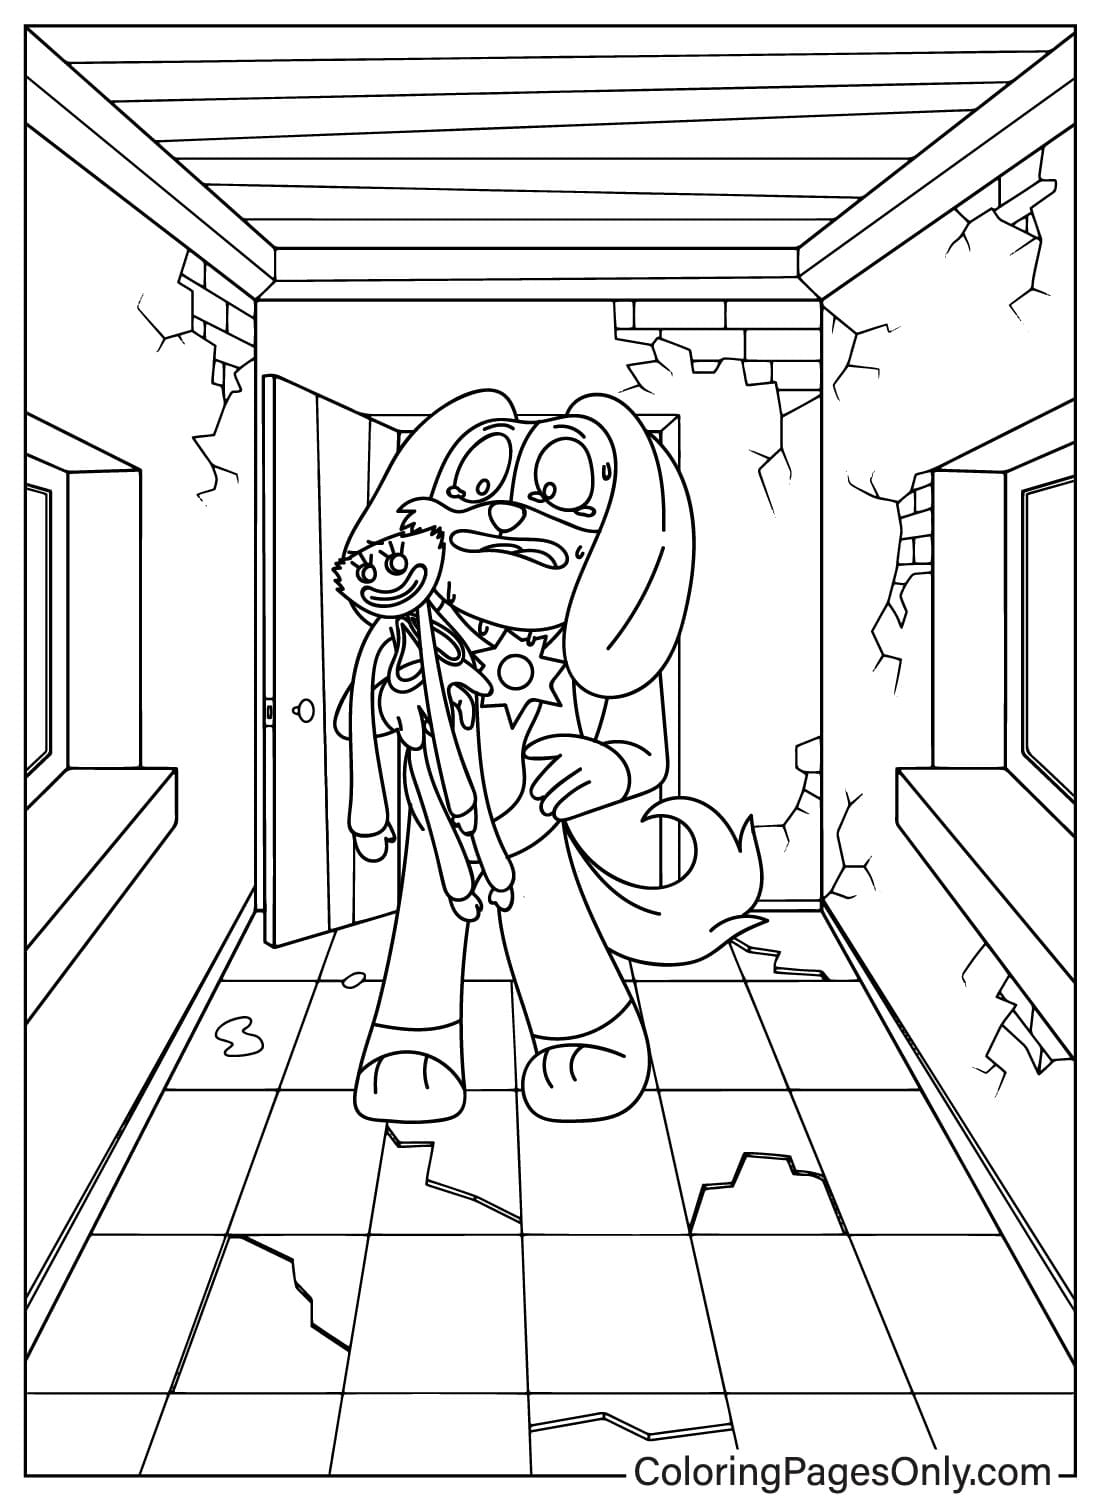 DogDay and Kissy Missy Coloring Page Free from DogDay